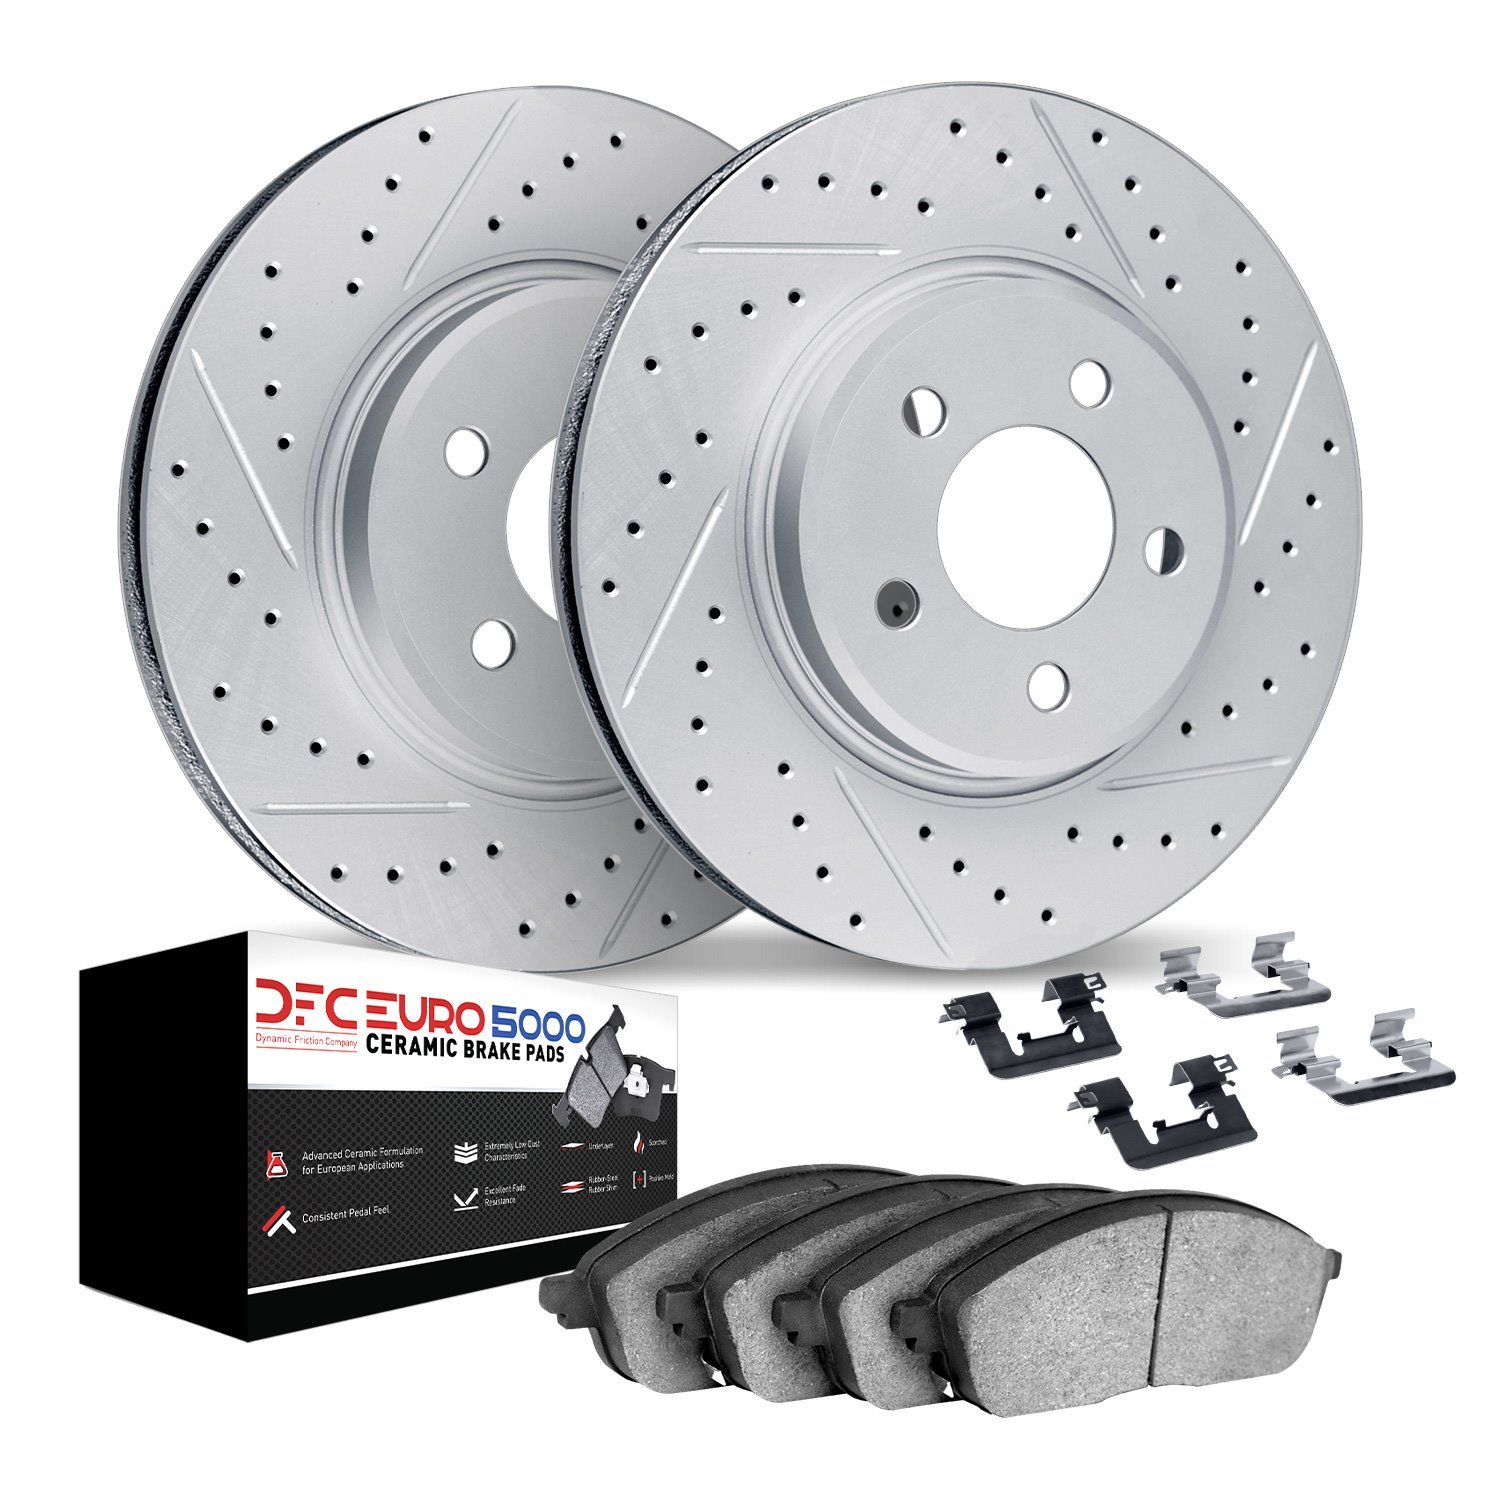 2612-65040 Geoperformance Drilled/Slotted Rotors w/5000 Euro Ceramic Brake Pads Kit & Hardware, Fits Select GM, Position: Rear